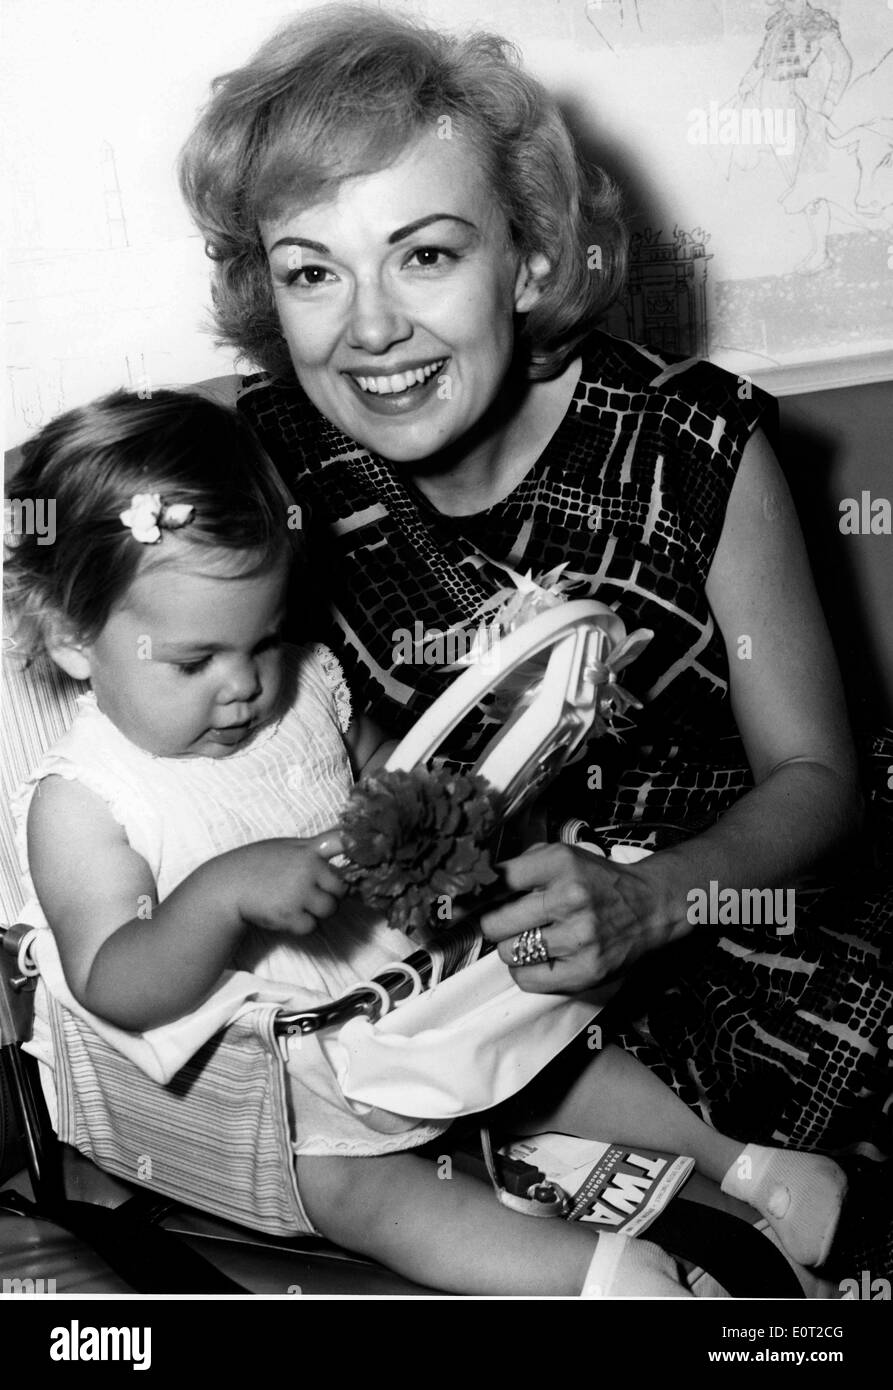 Jul 08, 1960 - New York, New York, U.S. - Actress and singer EDIE ADAMS, the blonde beauty who won a Tony Award for bringing Daisy Mae to life on Broadway and who played the television foil to her husband, comedian Ernie Kovacs, has died. She was 81. Edie Adams, seen here in 1963, became most famous for her role in a cigar commercial. Adams died Wednesday in a Los Angeles hospital from pneumonia and cancer Caption: Lovely actress Edie Adams playfully amuses her one year old daughter MIA KOVAC prior to winging their way via TWA's Superjet to their home in Los Angeles. Stock Photo